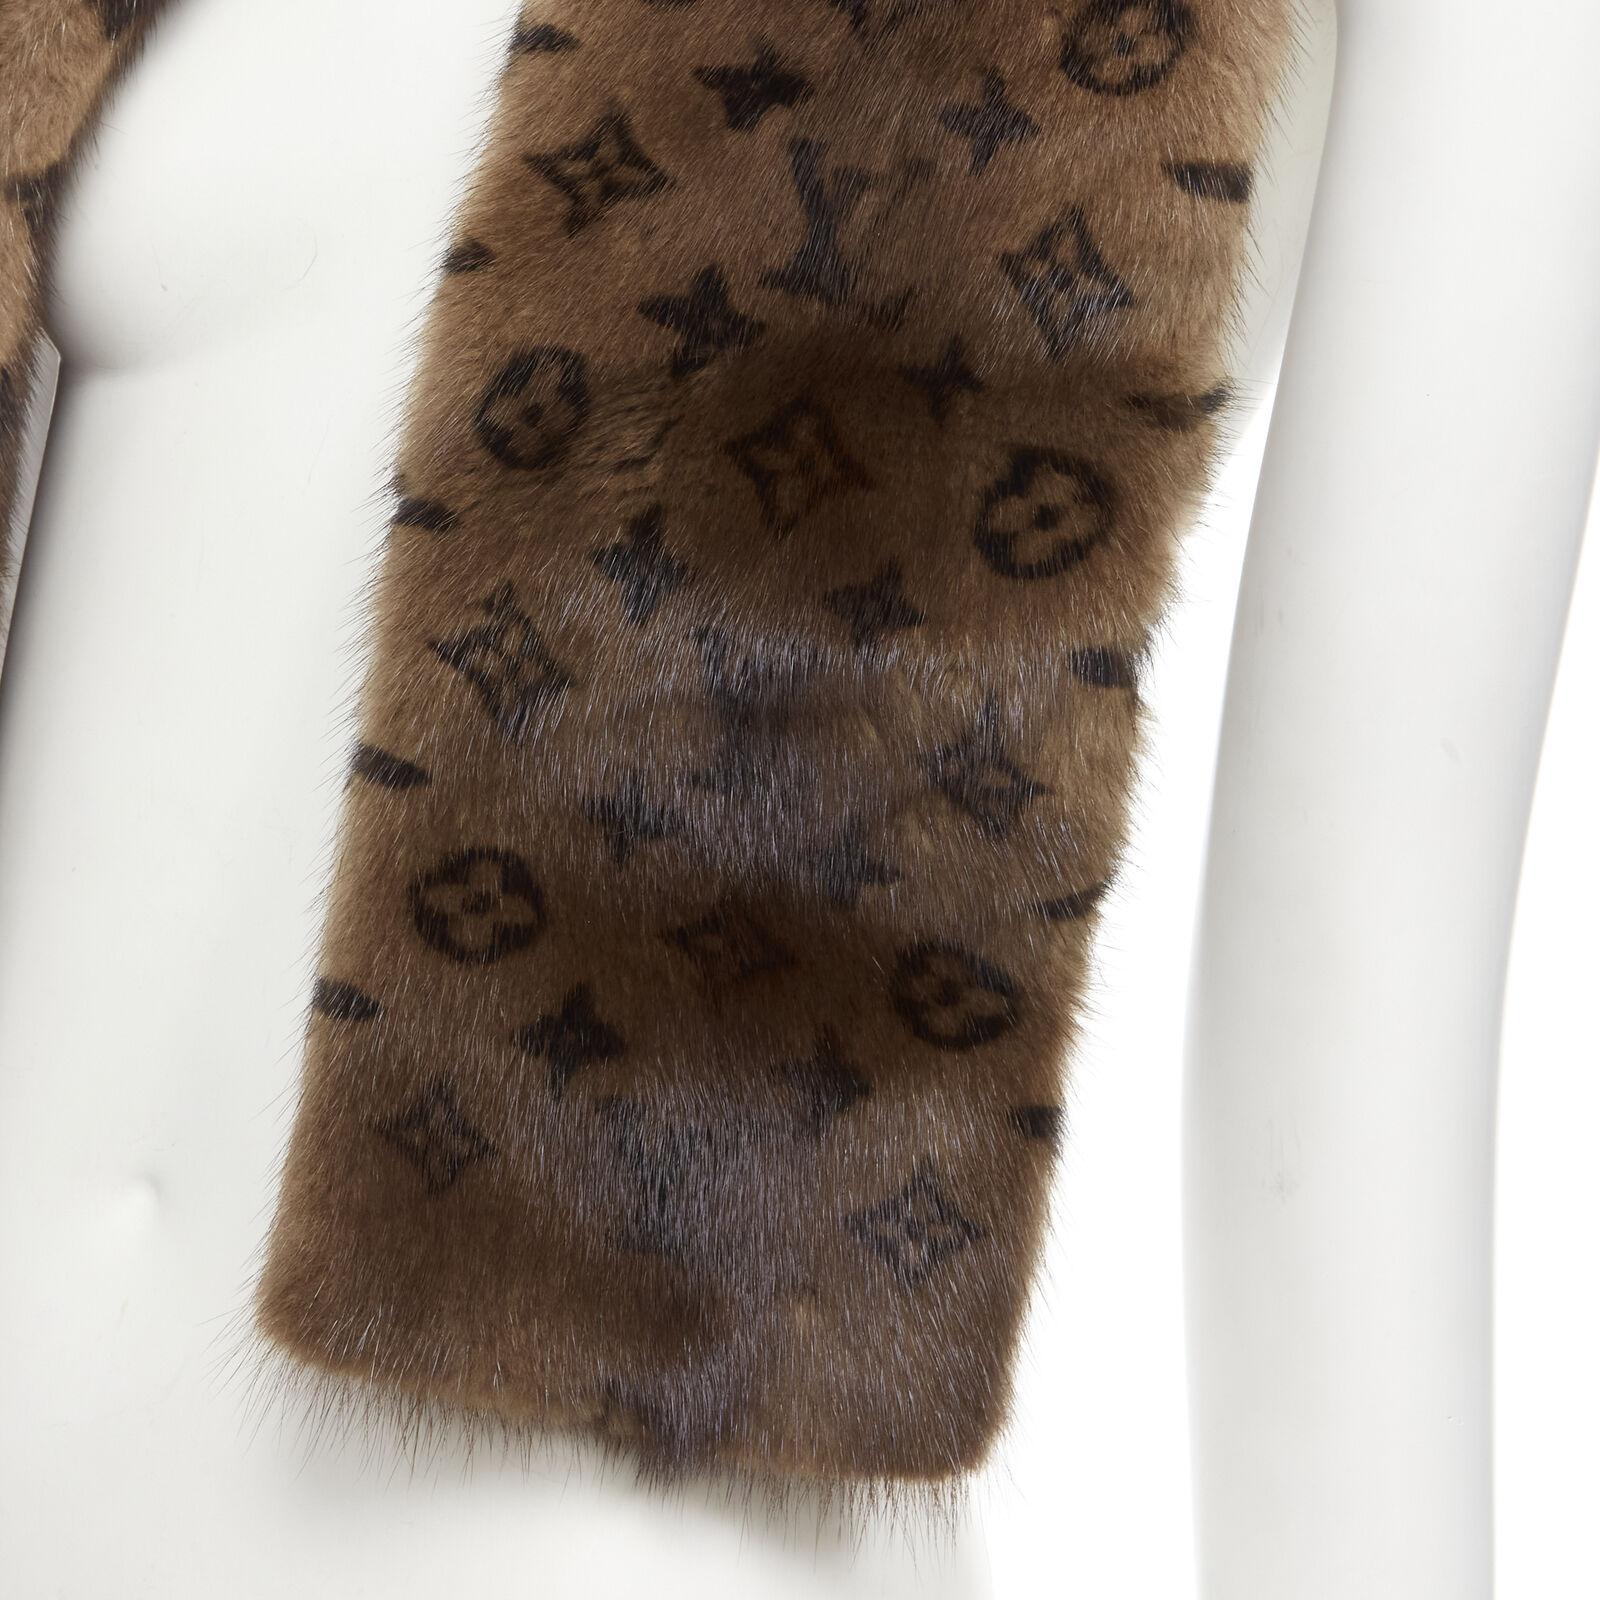 LOUIS VUITTON 100% Vison Mink fur brown monogram print shawl scarf
Reference: ANWU/A00894
Brand: Louis Vuitton
Designer: Marc Jacobs
Material: Fur
Color: Brown
Pattern: Monogram
Lining: Fur
Made in: France

CONDITION:
Condition: Excellent, this item